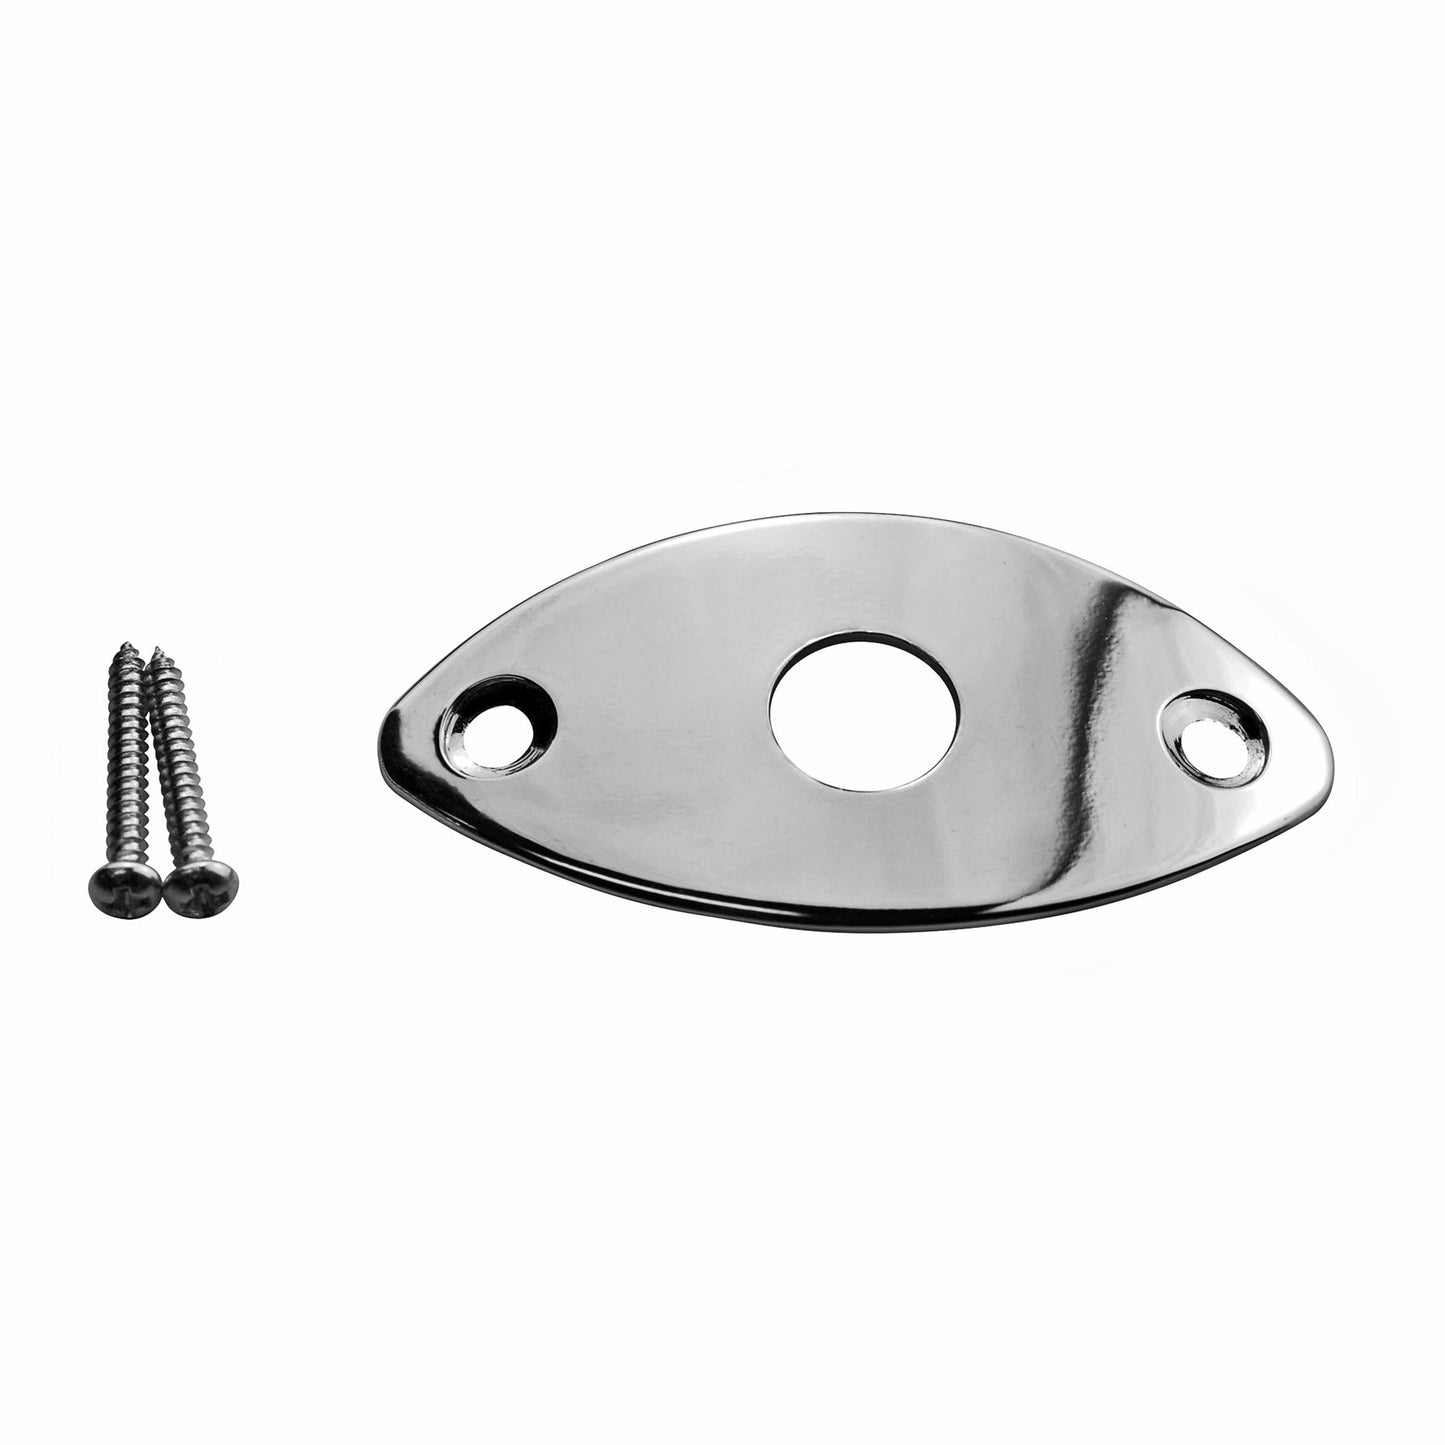 1/4" Oval Jack Plate for Electric Guitar